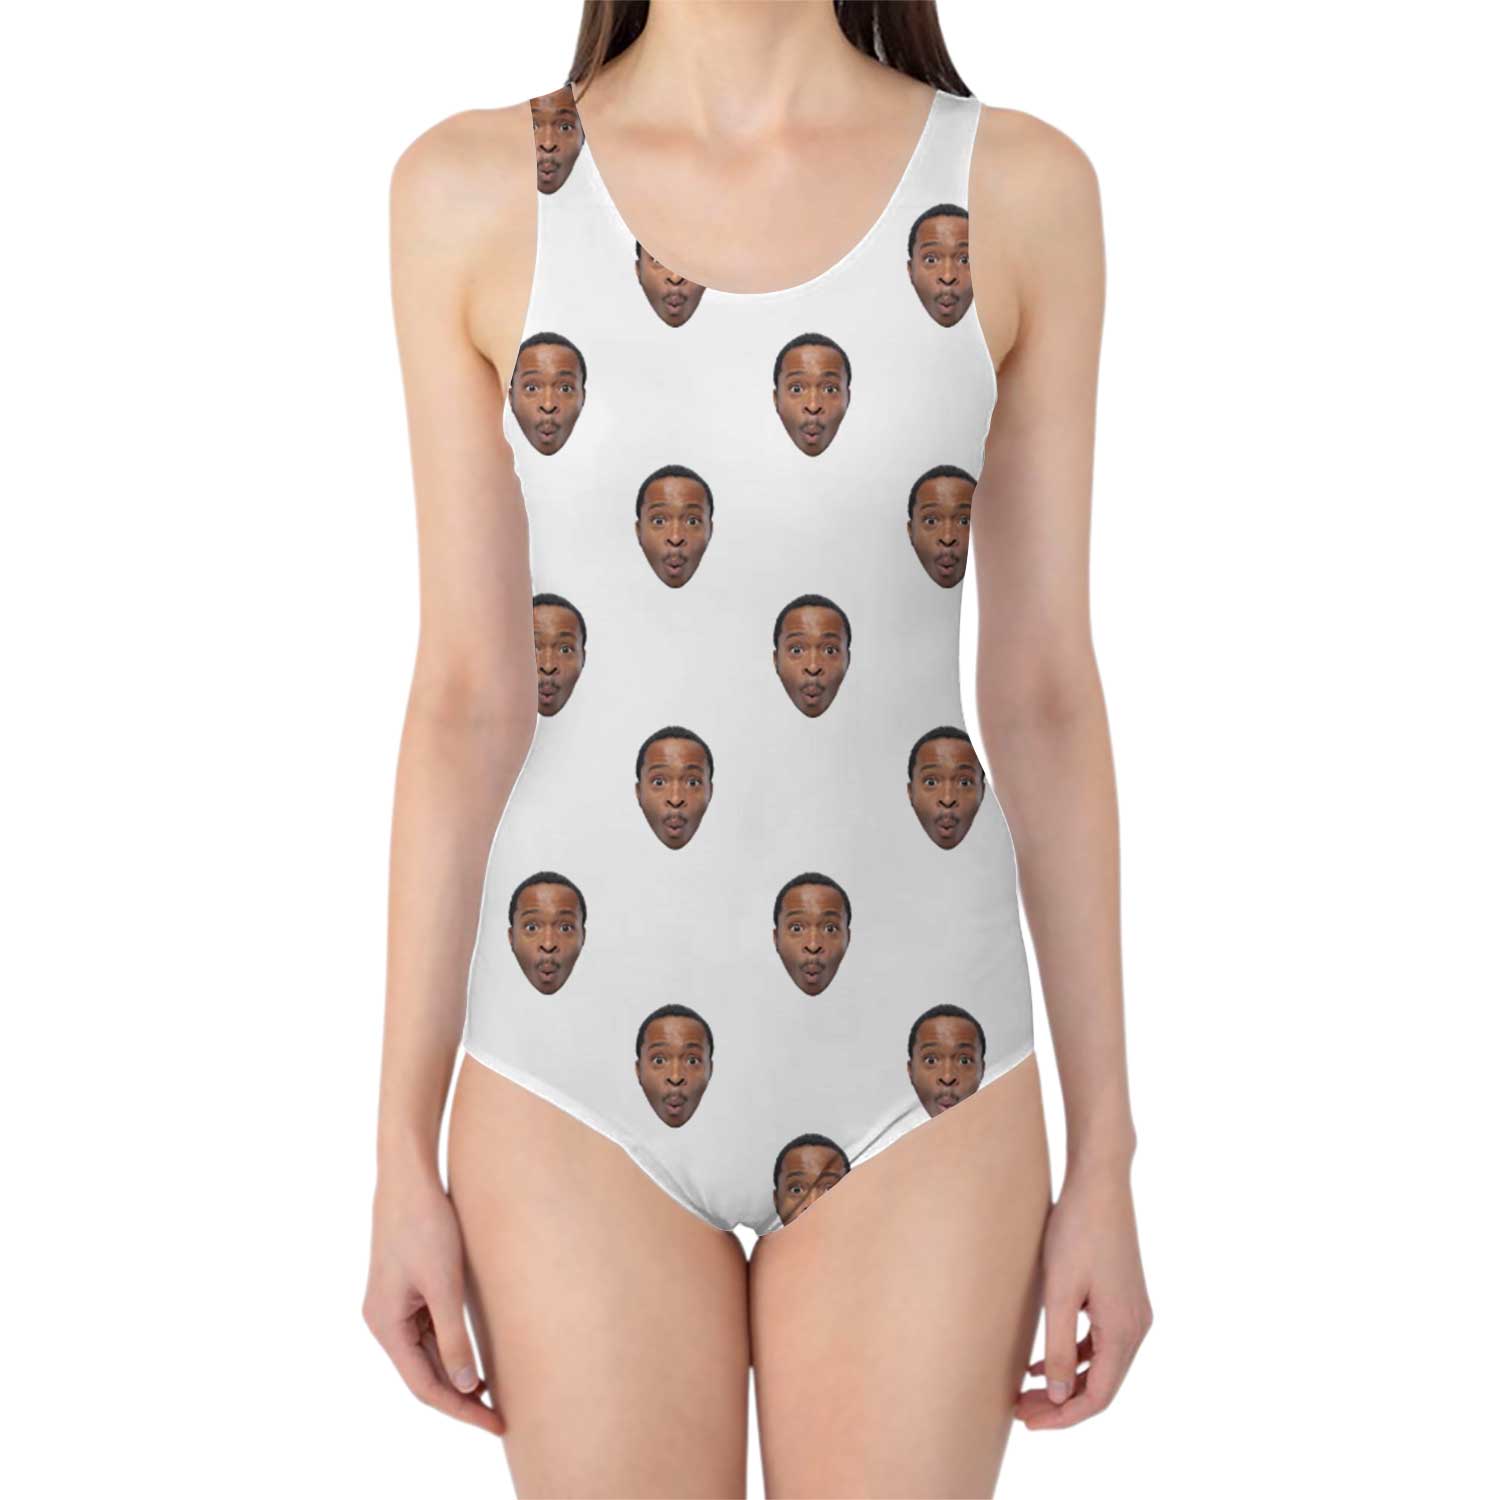 Custom Bathing Suit with your faces on